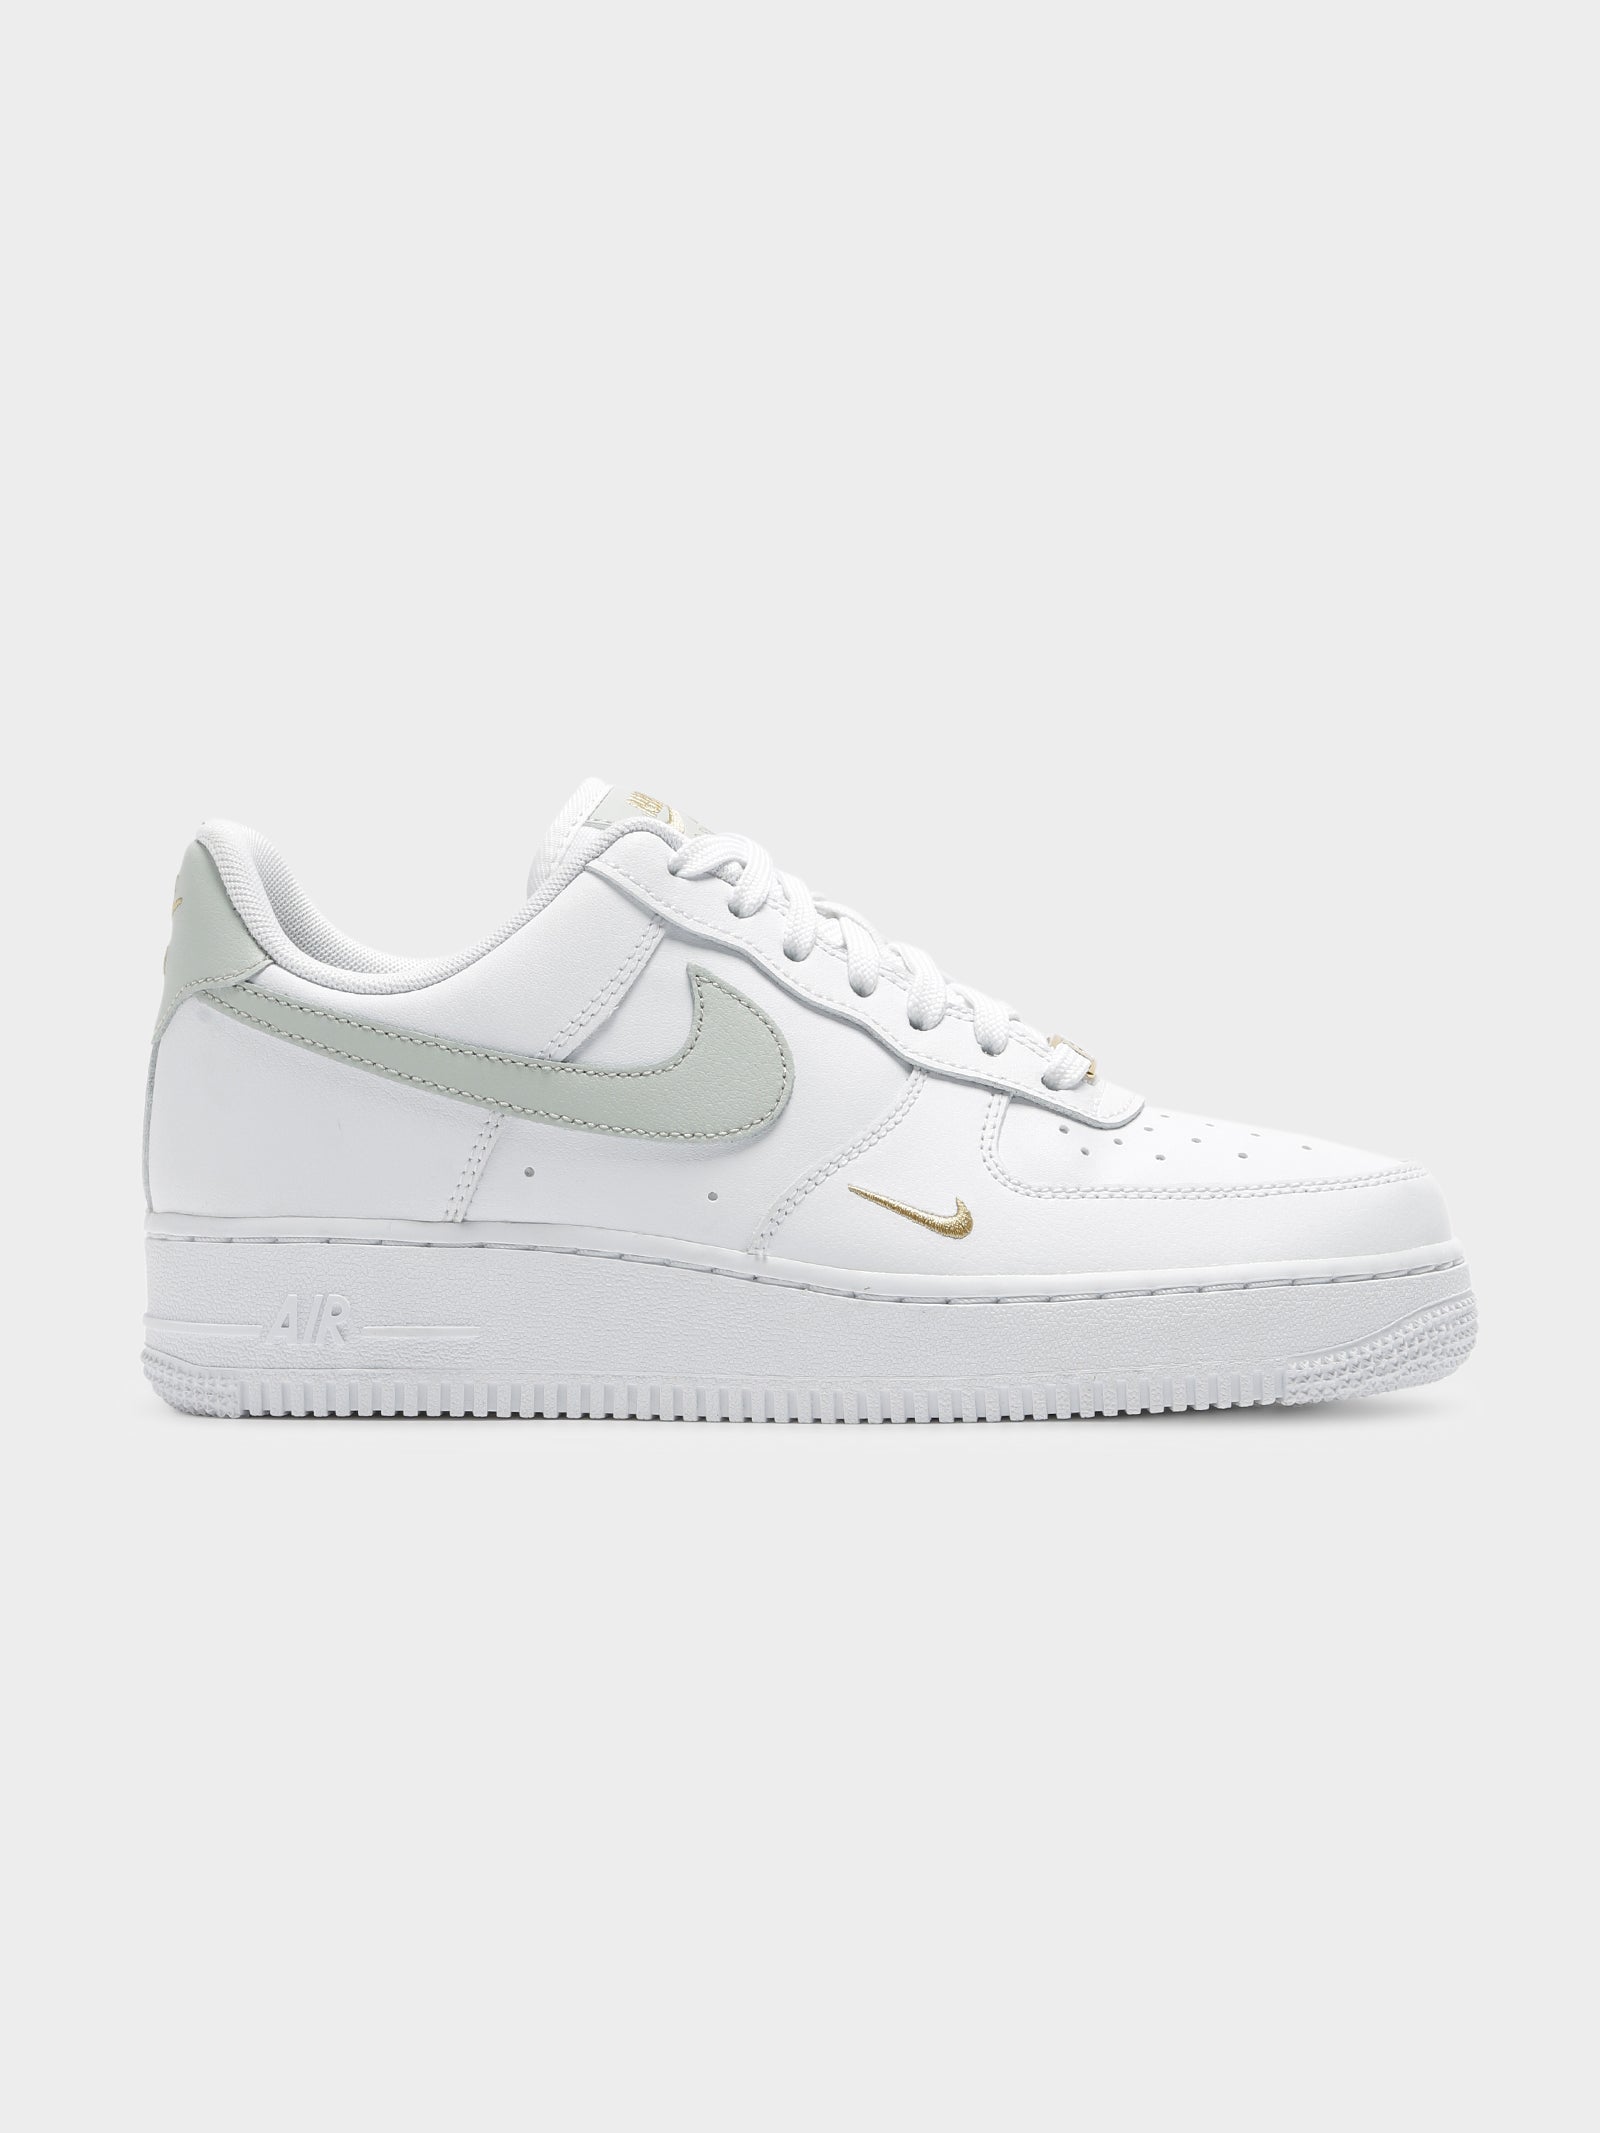 nike air force 1 07 white and grey